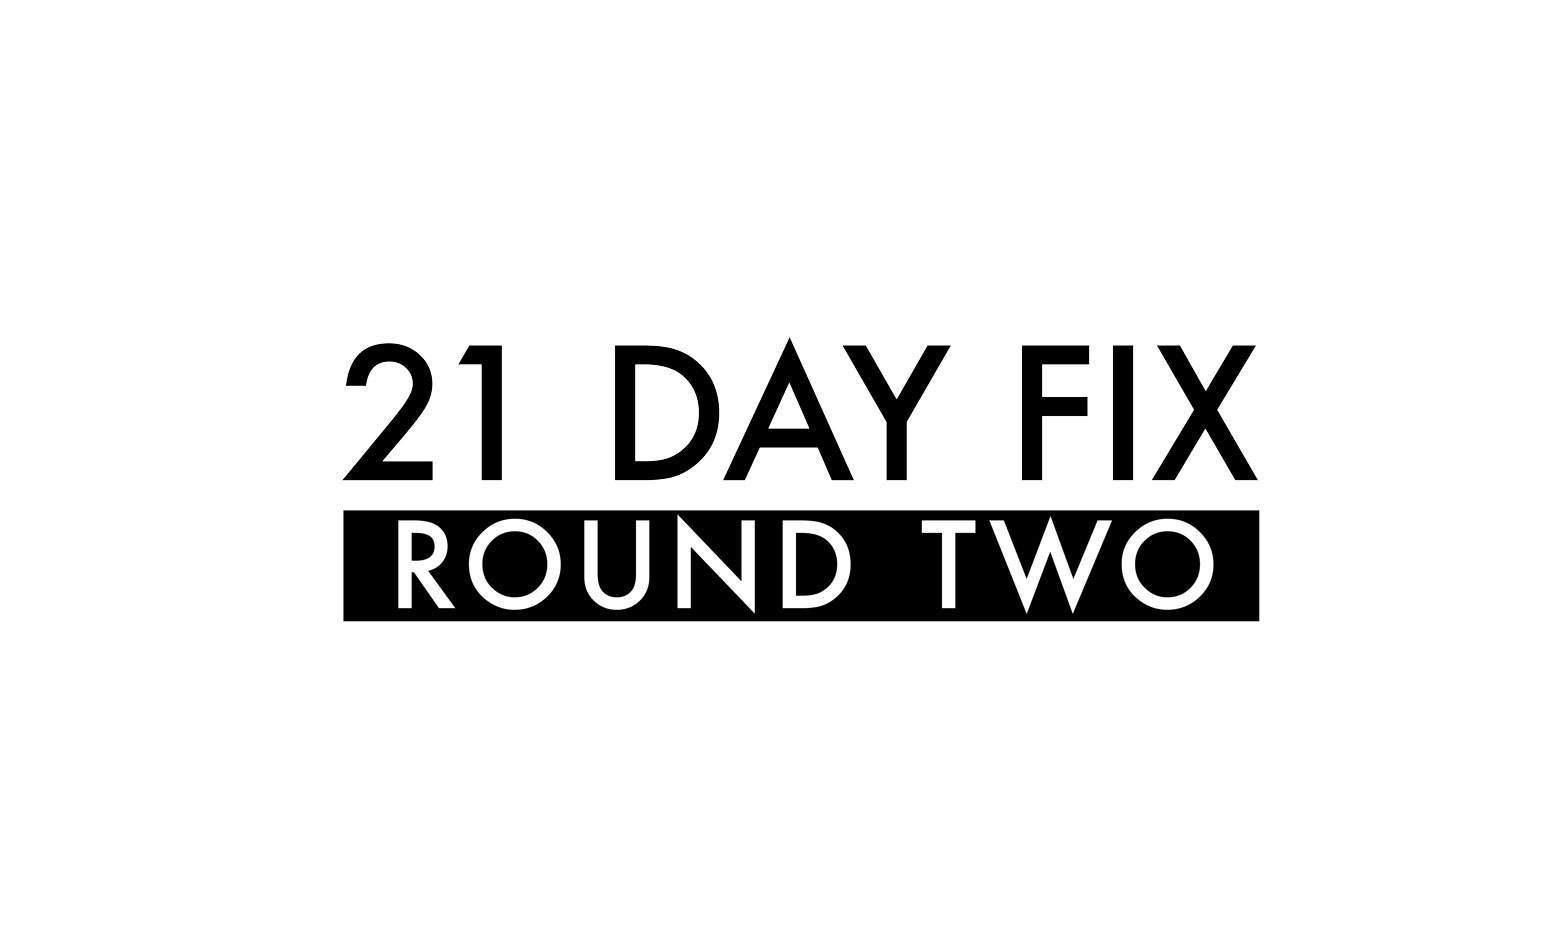 21 Day Fix ROUND TWO!